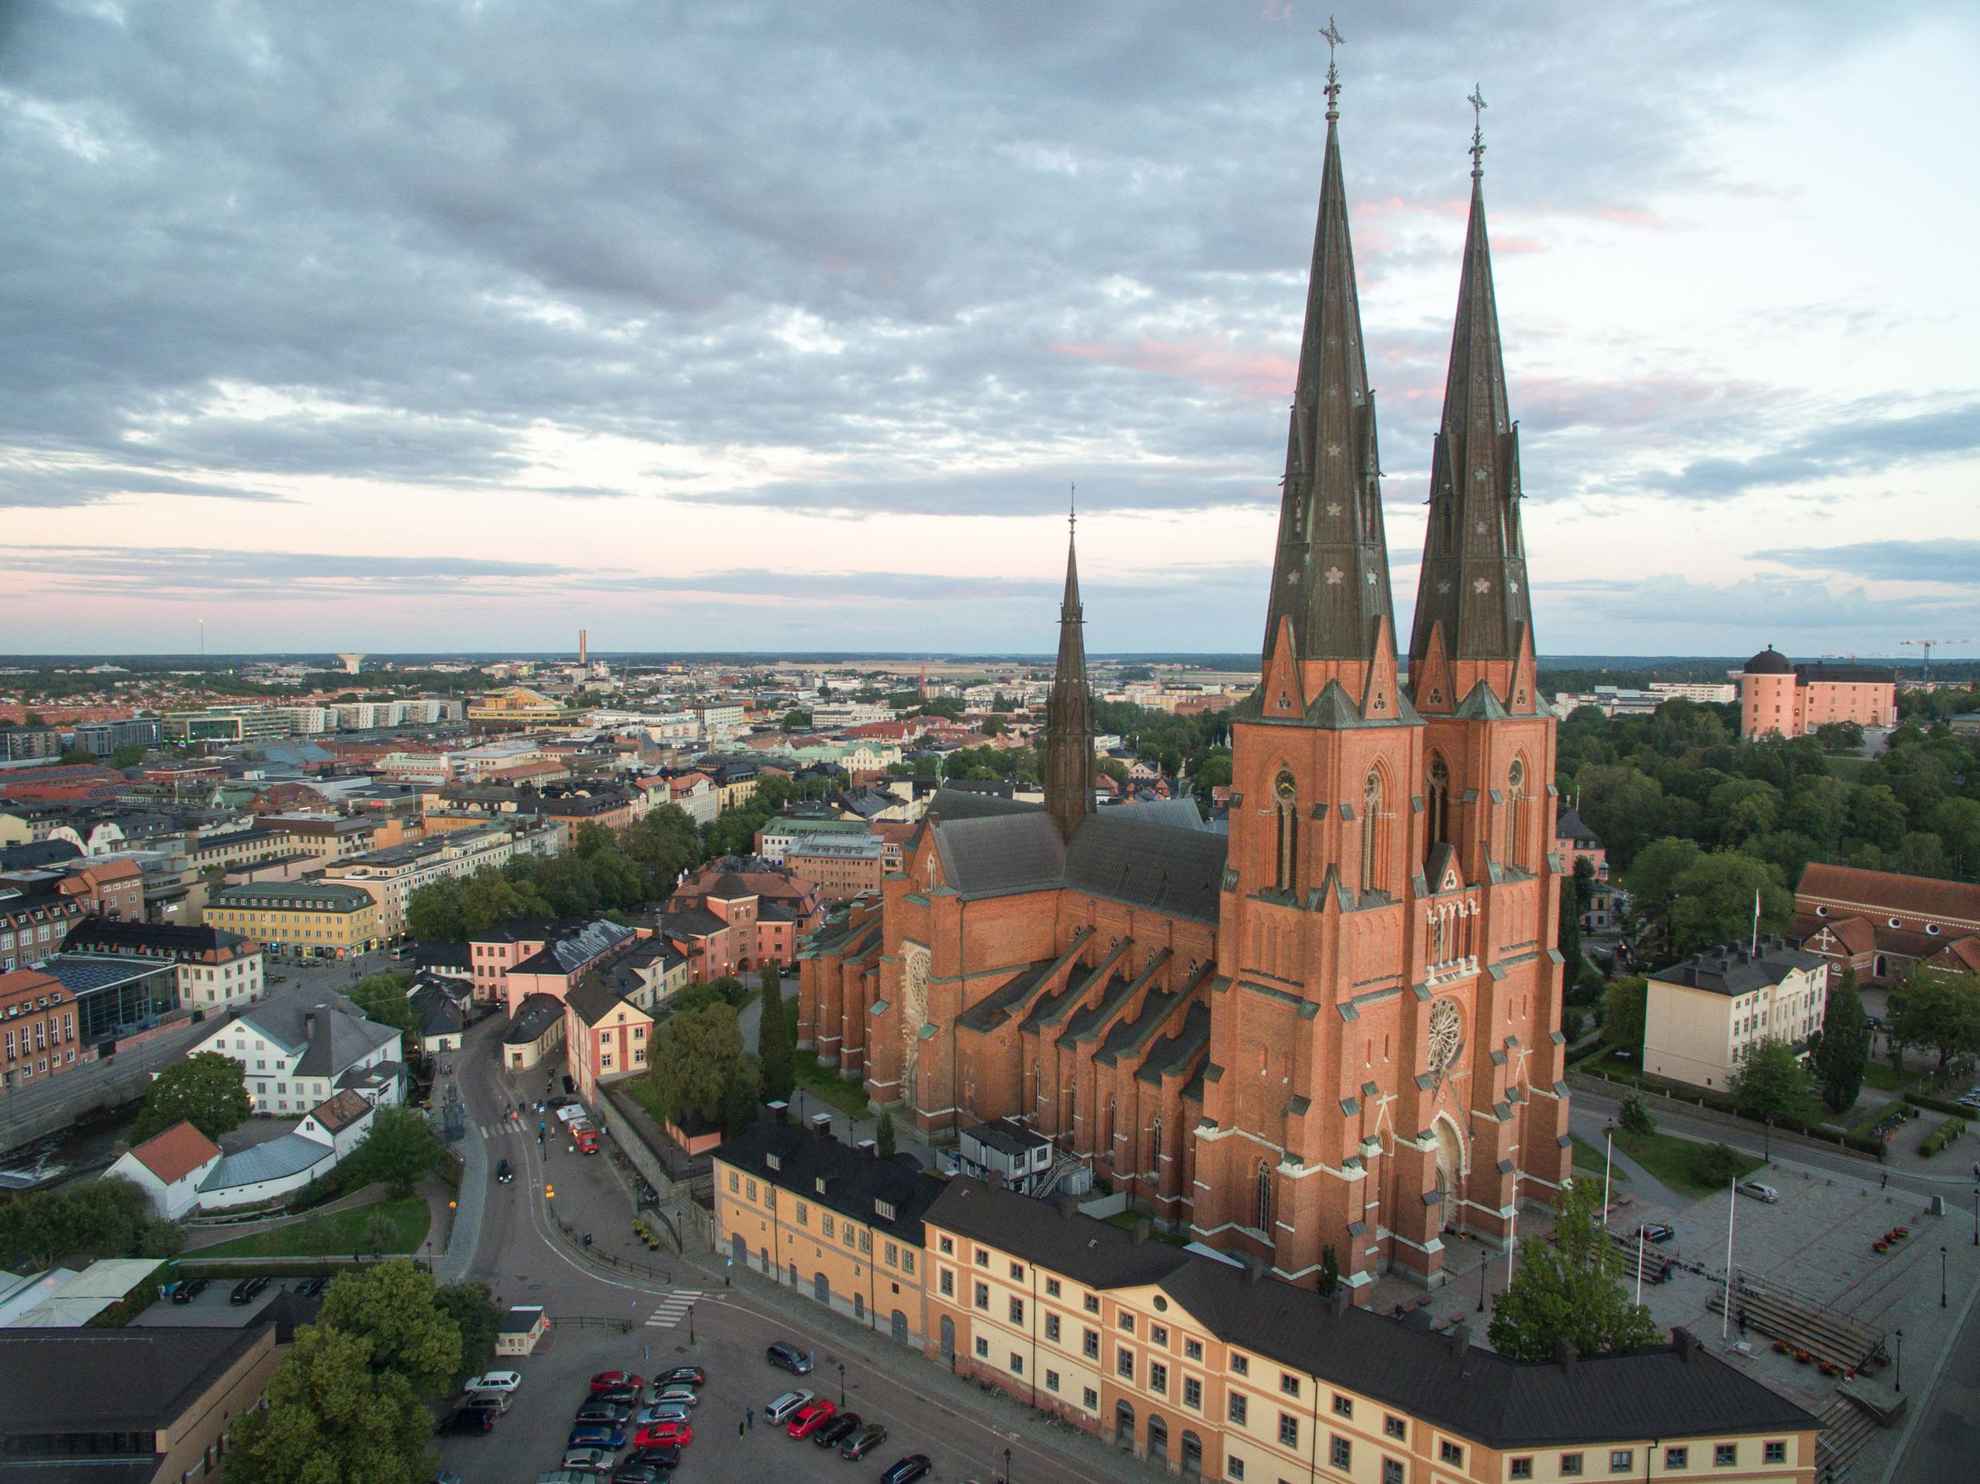 Uppsala Cathedral and the city seen from above.